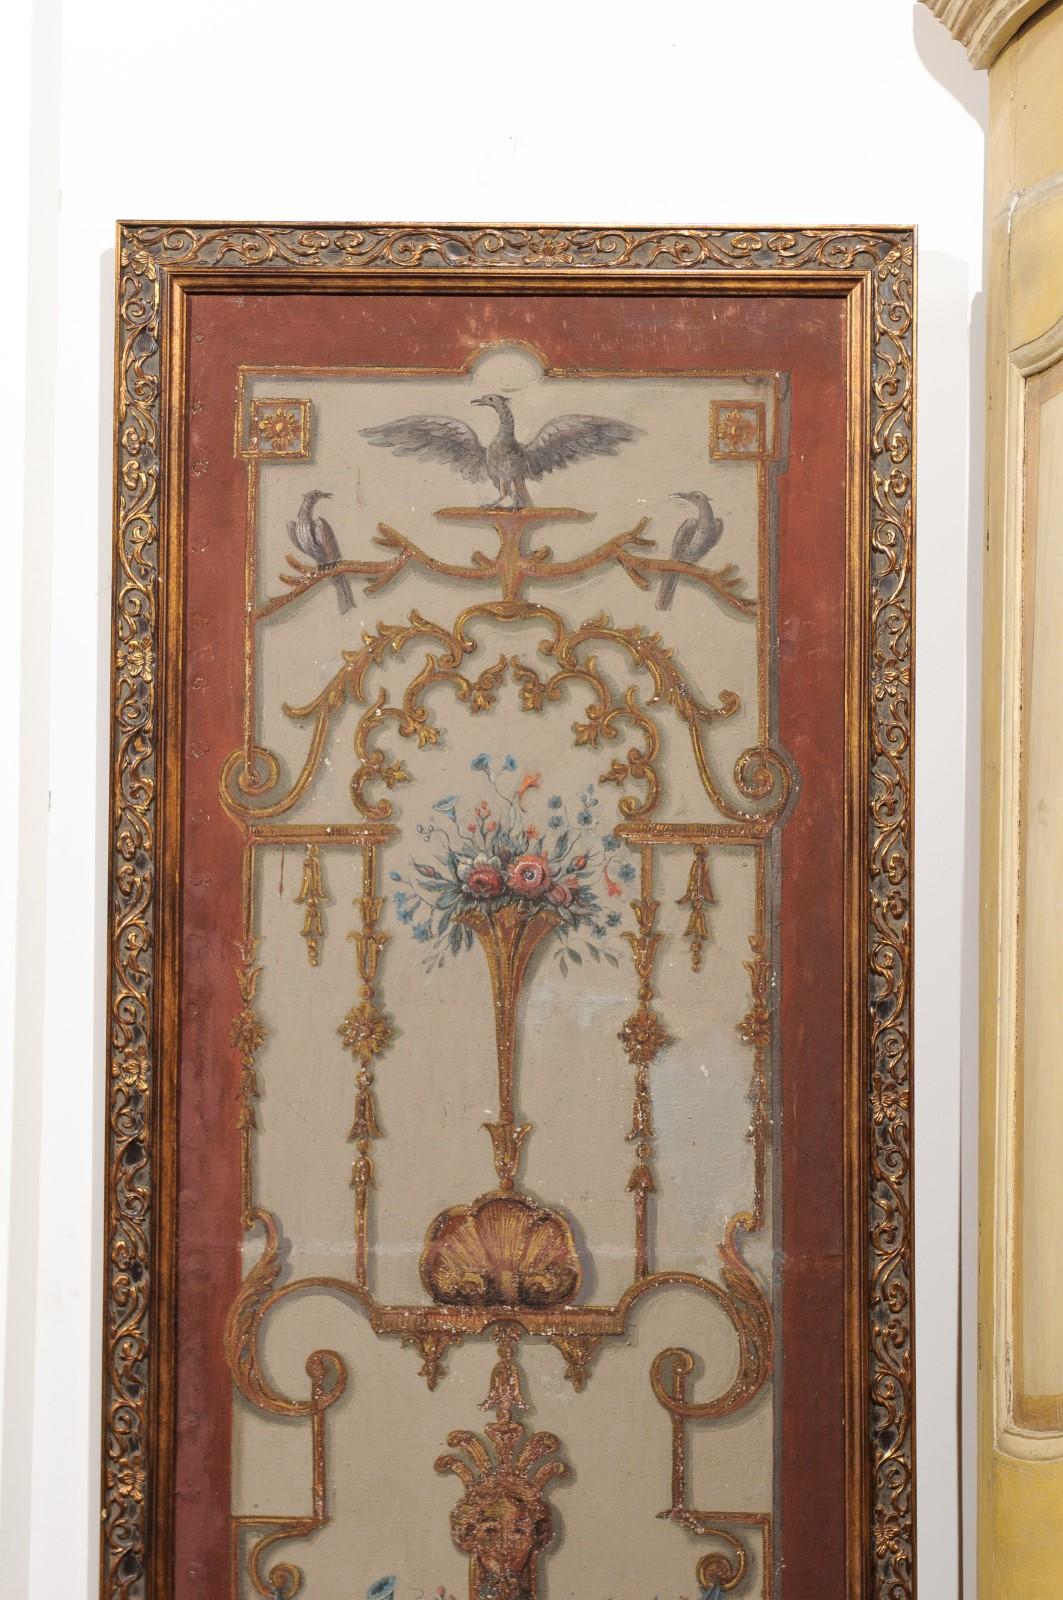 Pair of French Régence Period Early 18th Century Decorative Framed Wall Panels 1